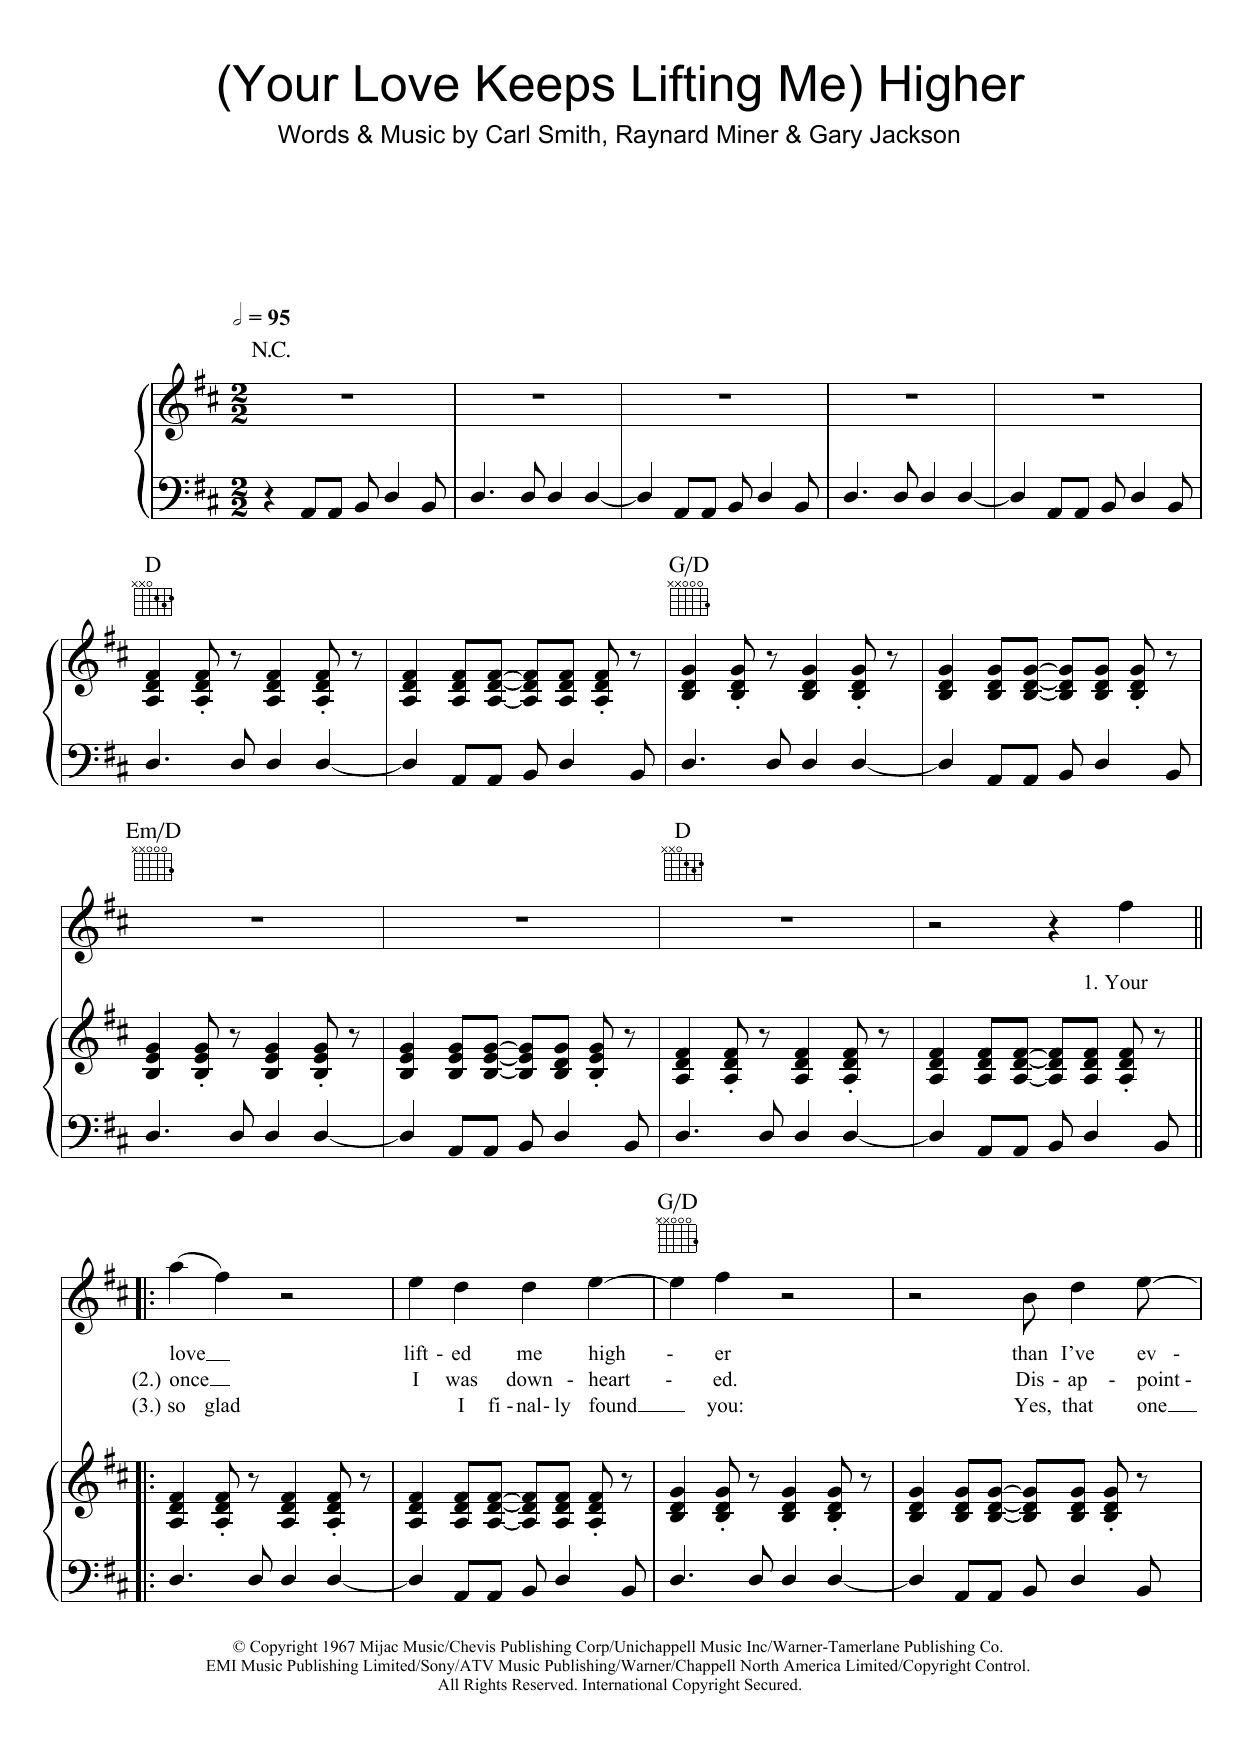 Download Jackie Wilson (Your Love Keeps Lifting Me) Higher And Sheet Music